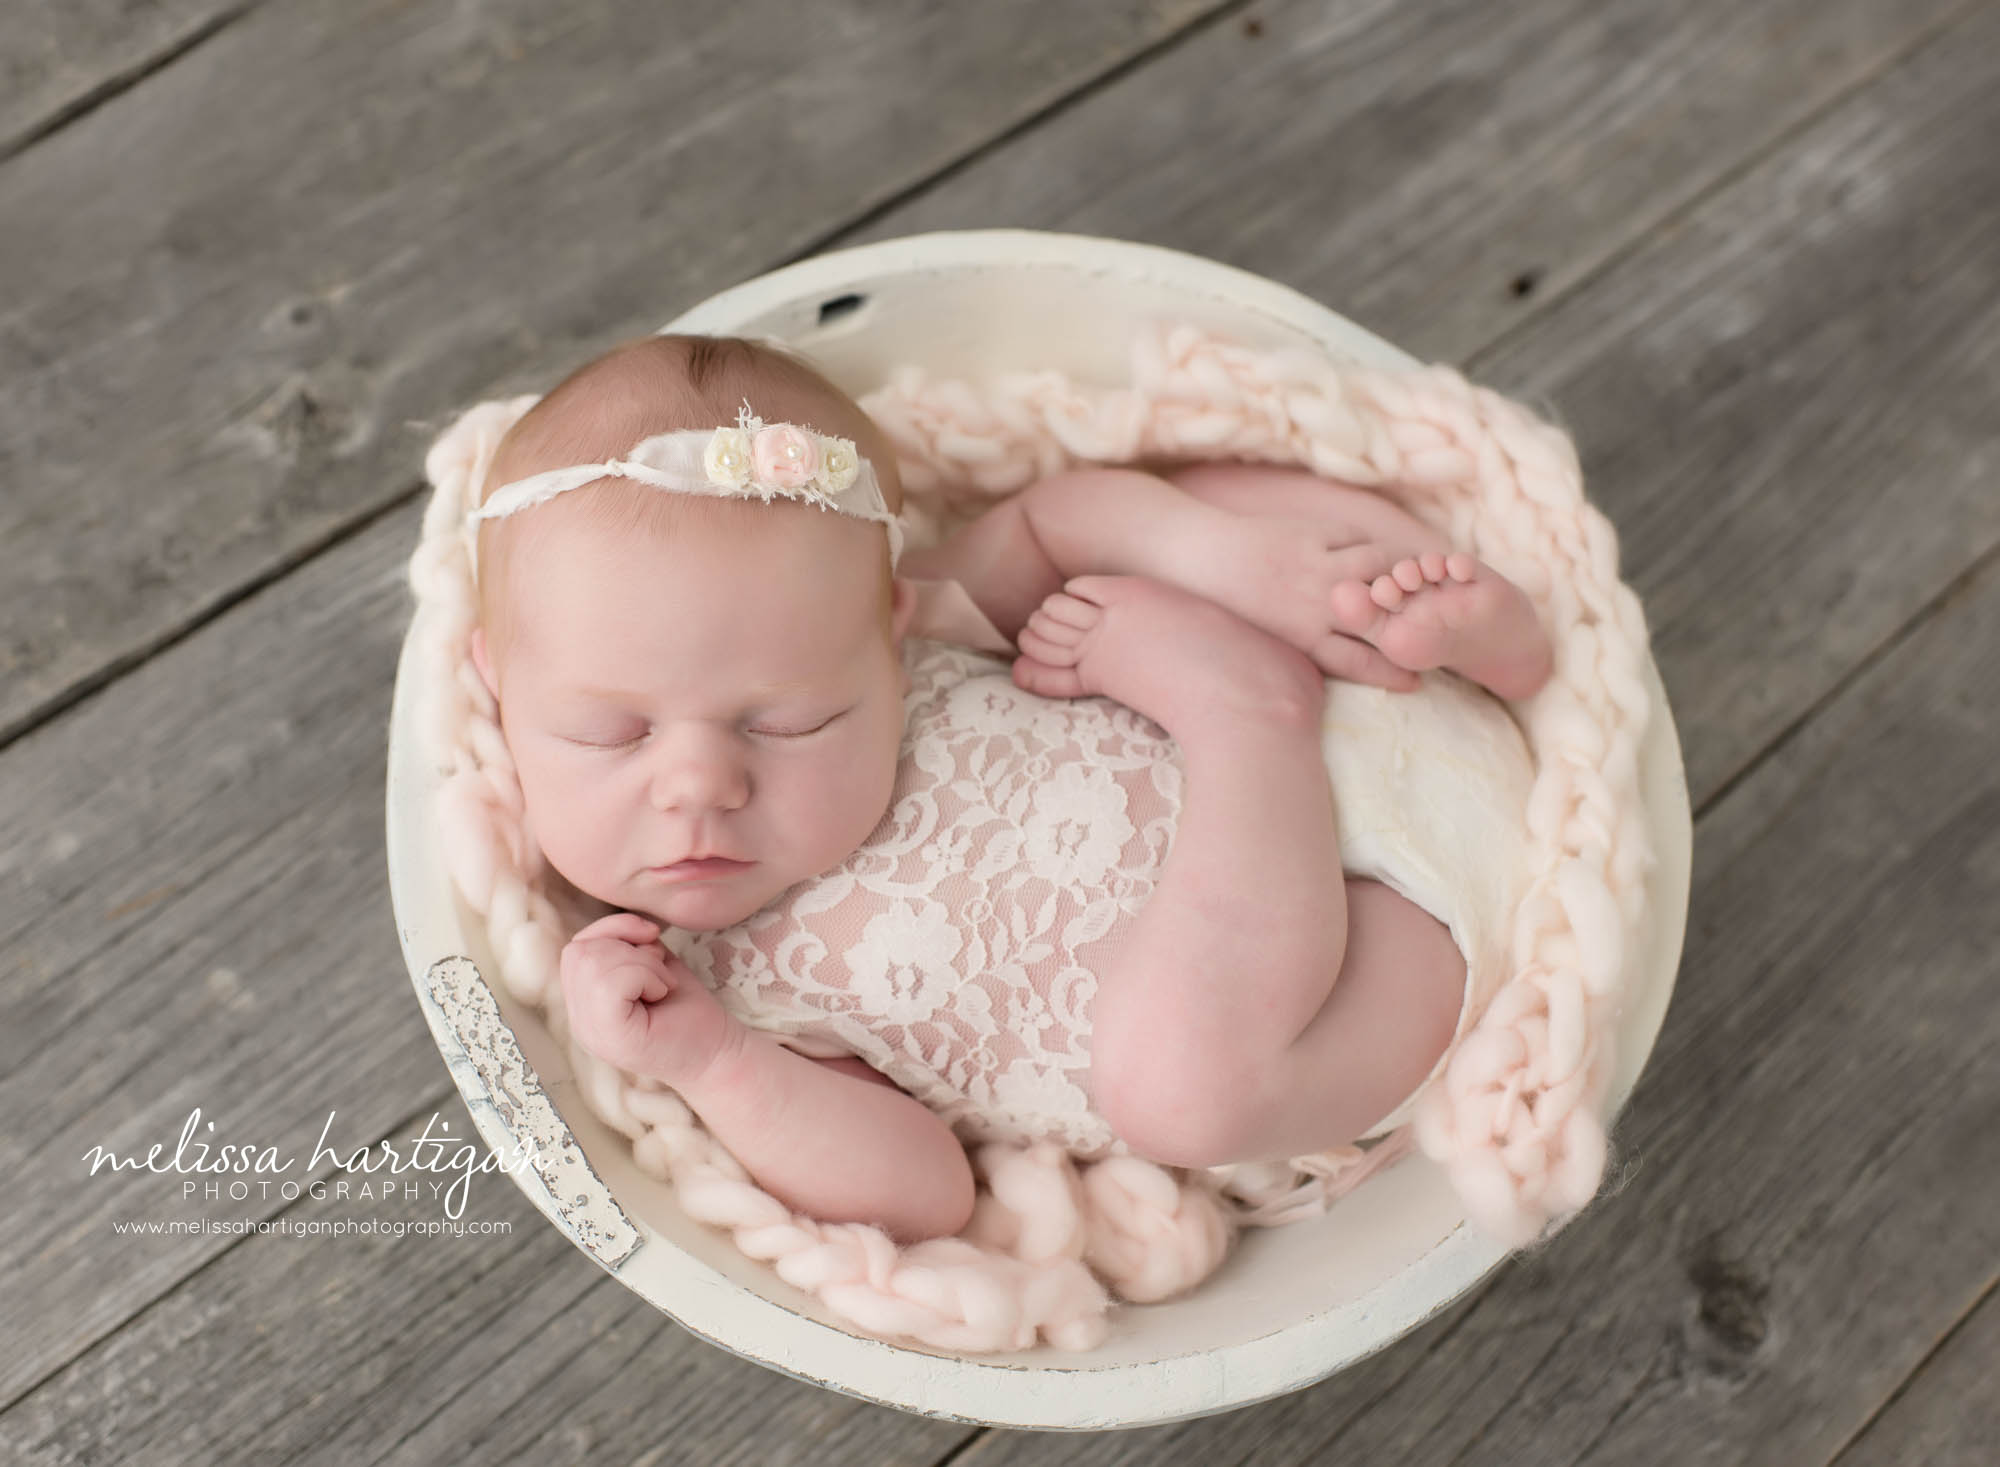 Melissa Hartigan Photography Connecticut Newborn Photographer in Coventry baby girl sleeping in white wooden bowl wearing lace romper and floral headband